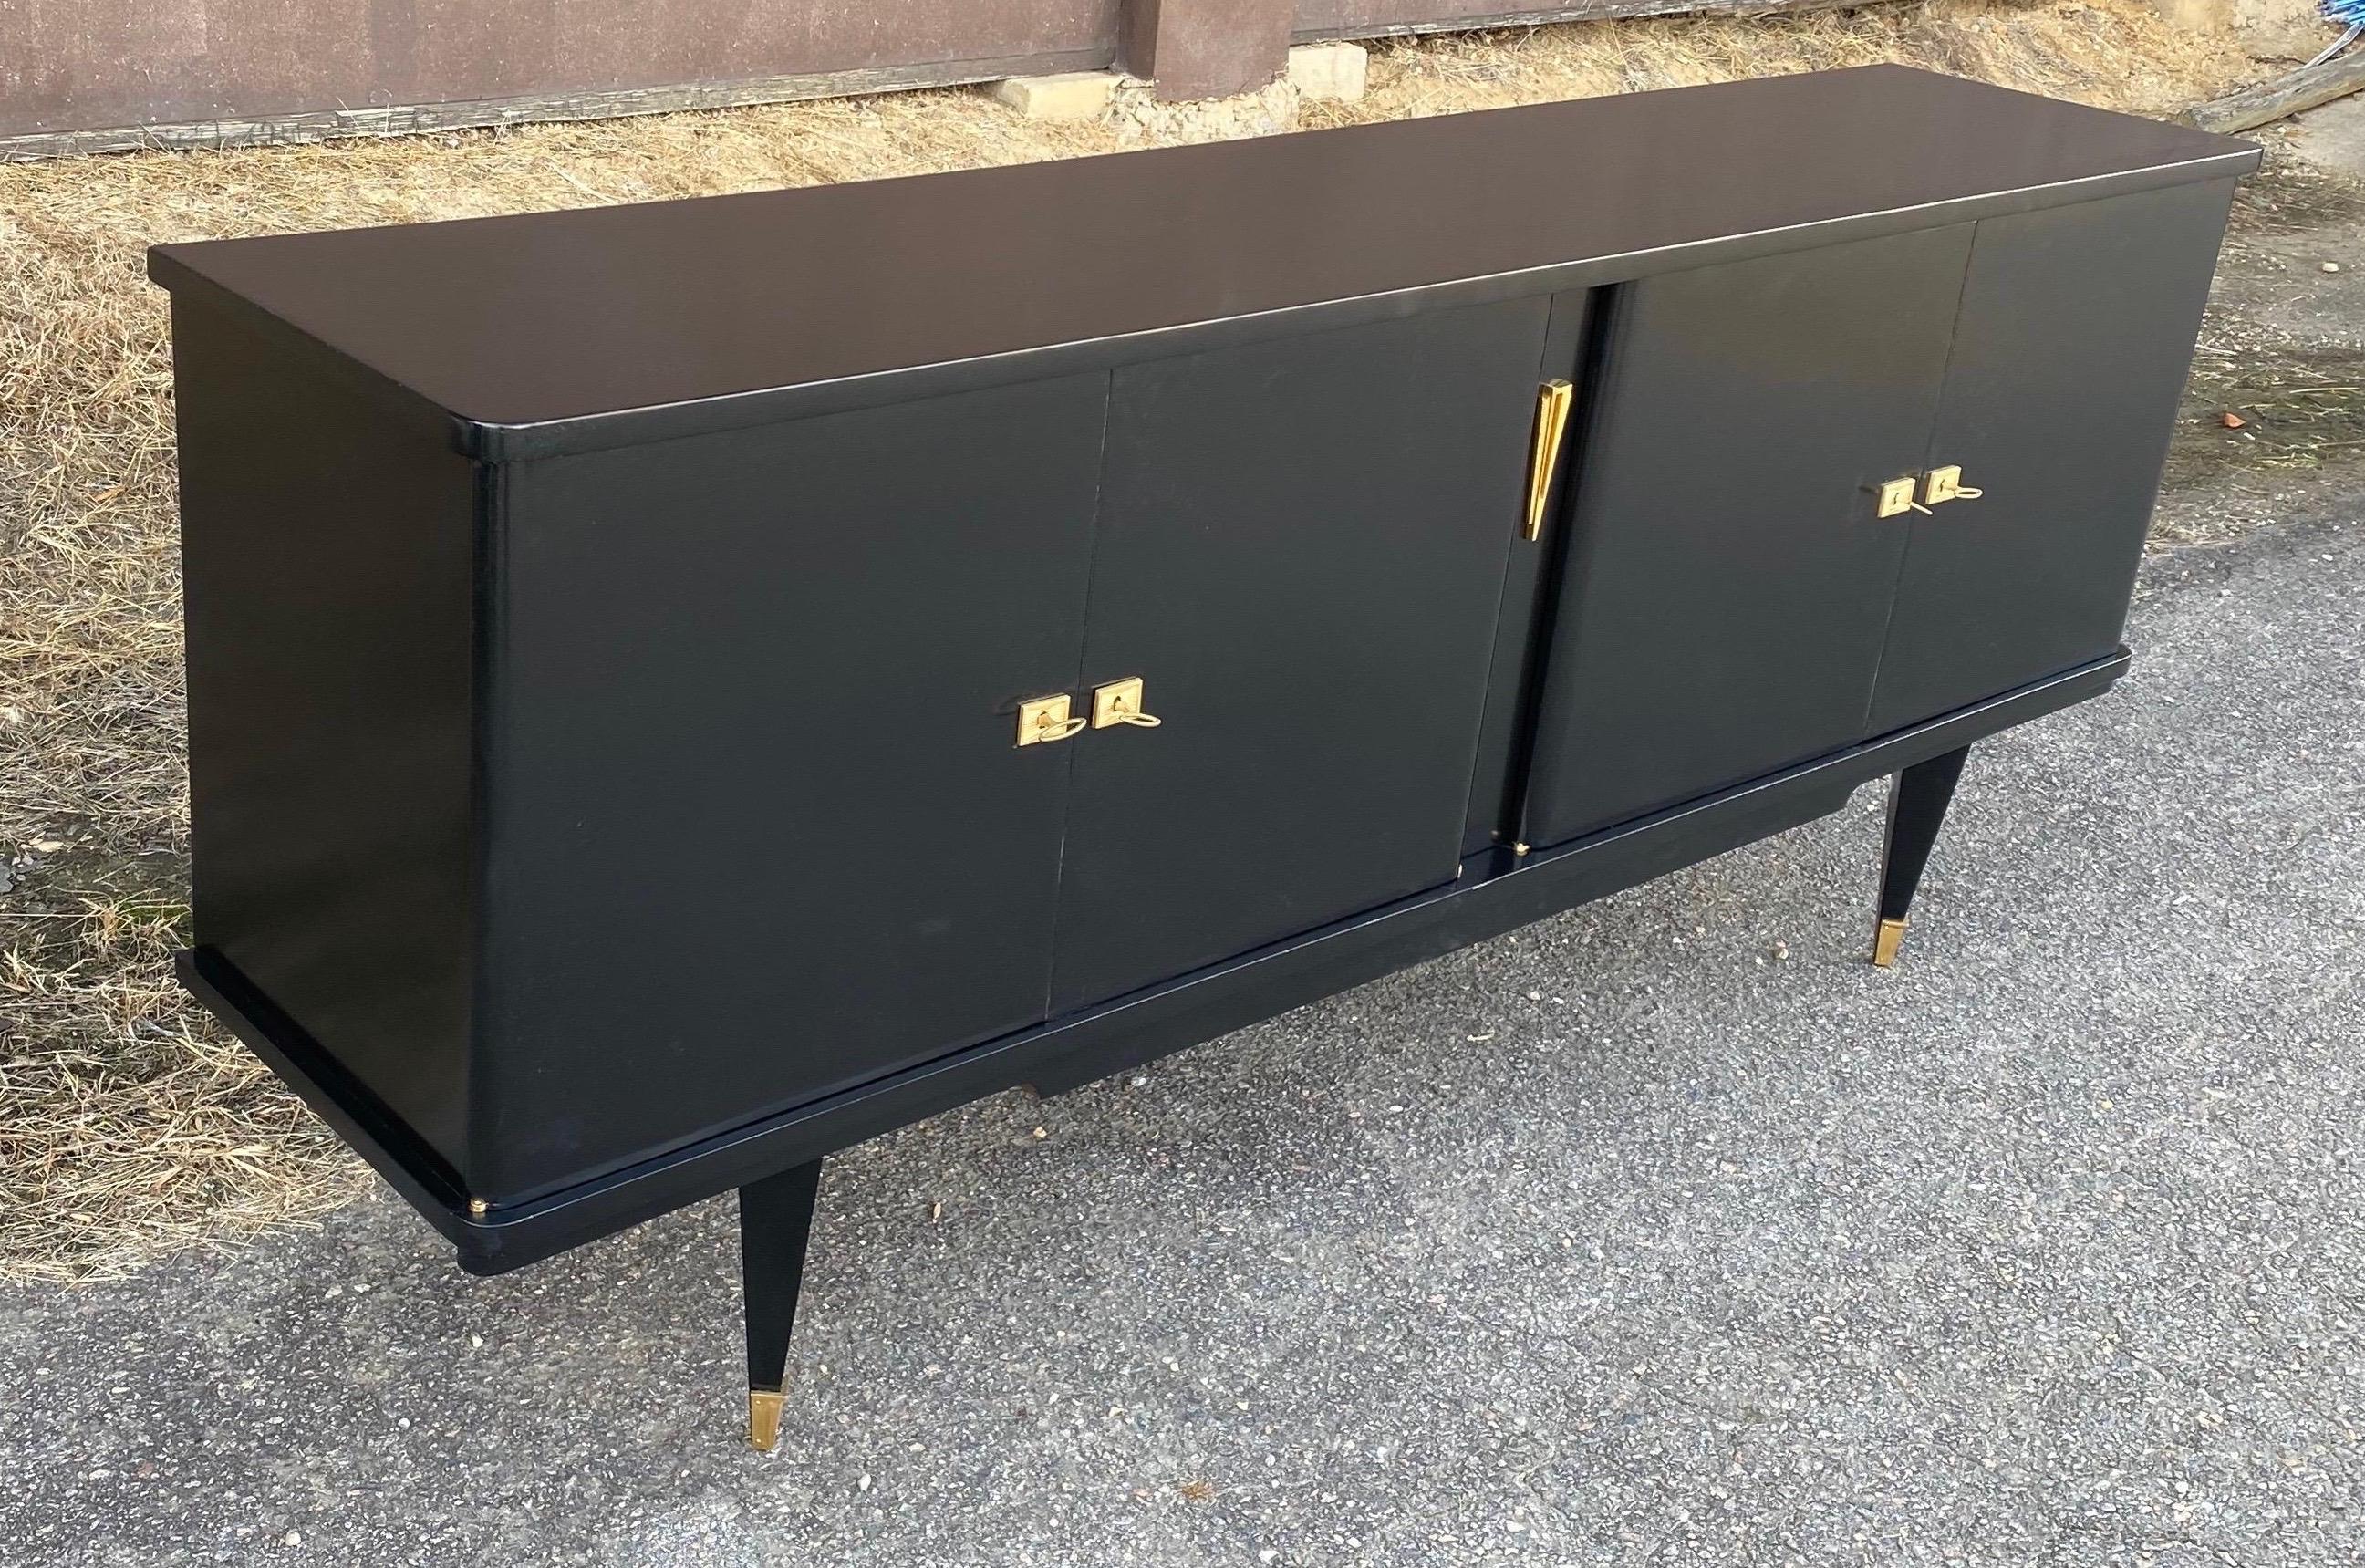 Mid-Century Modern ebonized French Art Deco credenza. Four doors open to reveal shelving, bar area and storage. Very sleek and clean lines.